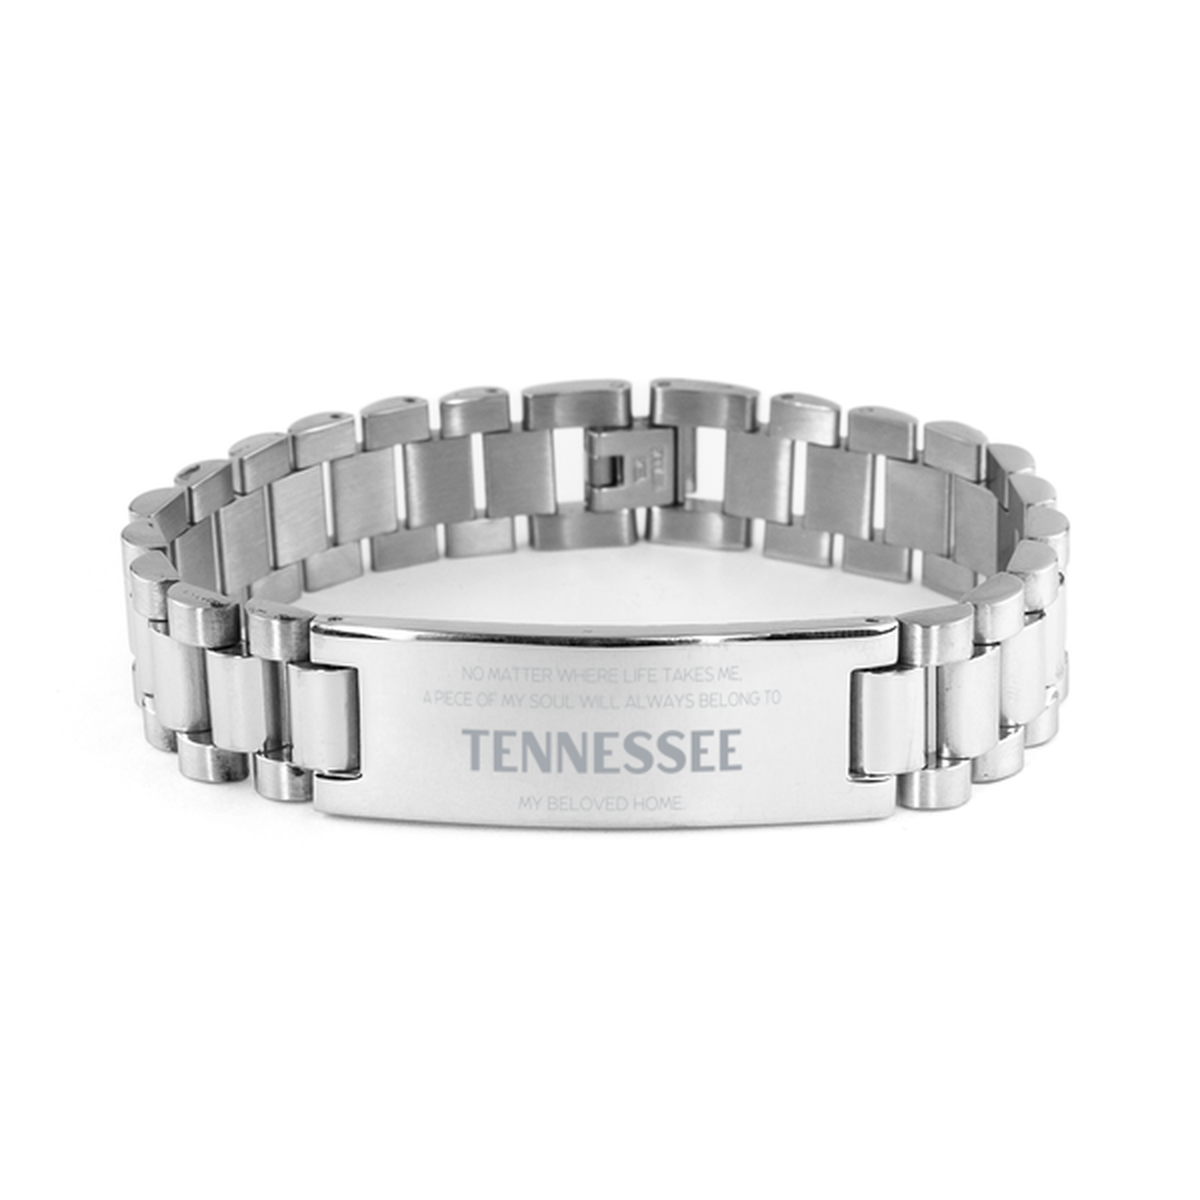 Love Tennessee State Gifts, My soul will always belong to Tennessee, Proud Ladder Stainless Steel Bracelet, Birthday Unique Gifts For Tennessee Men, Women, Friends